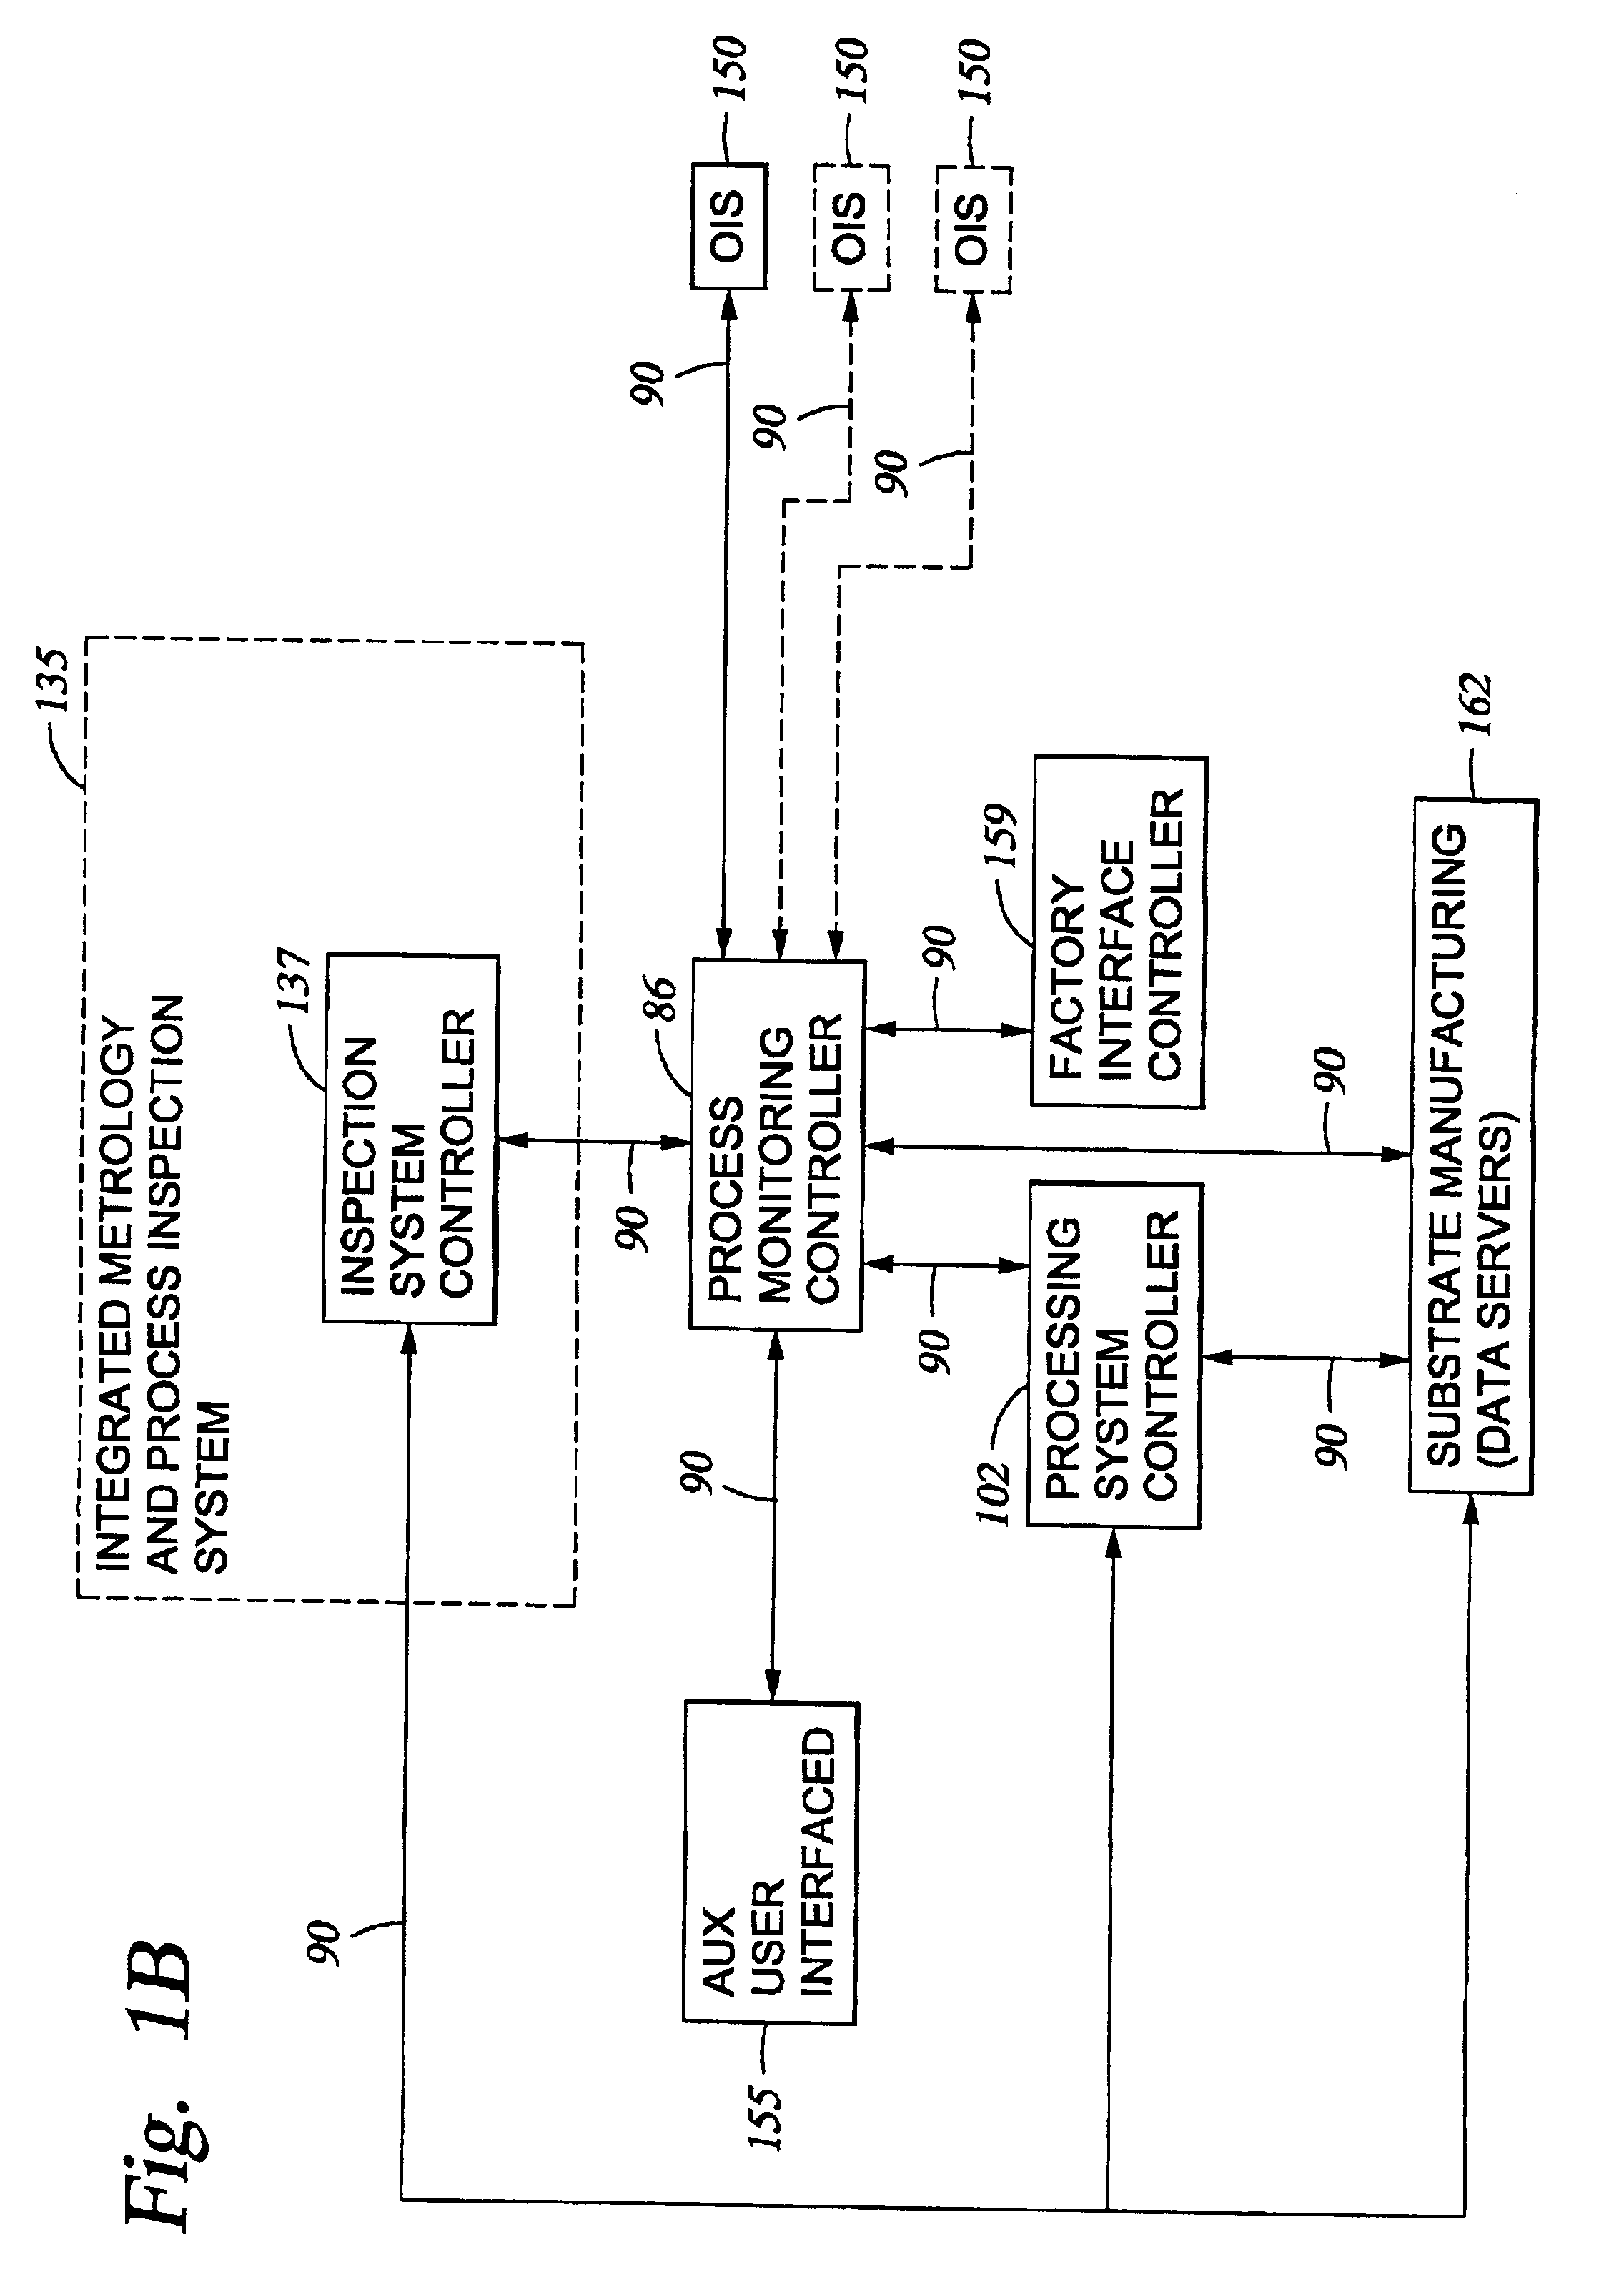 Methods for continuous embedded process monitoring and optical inspection of substrates using specular signature analysis